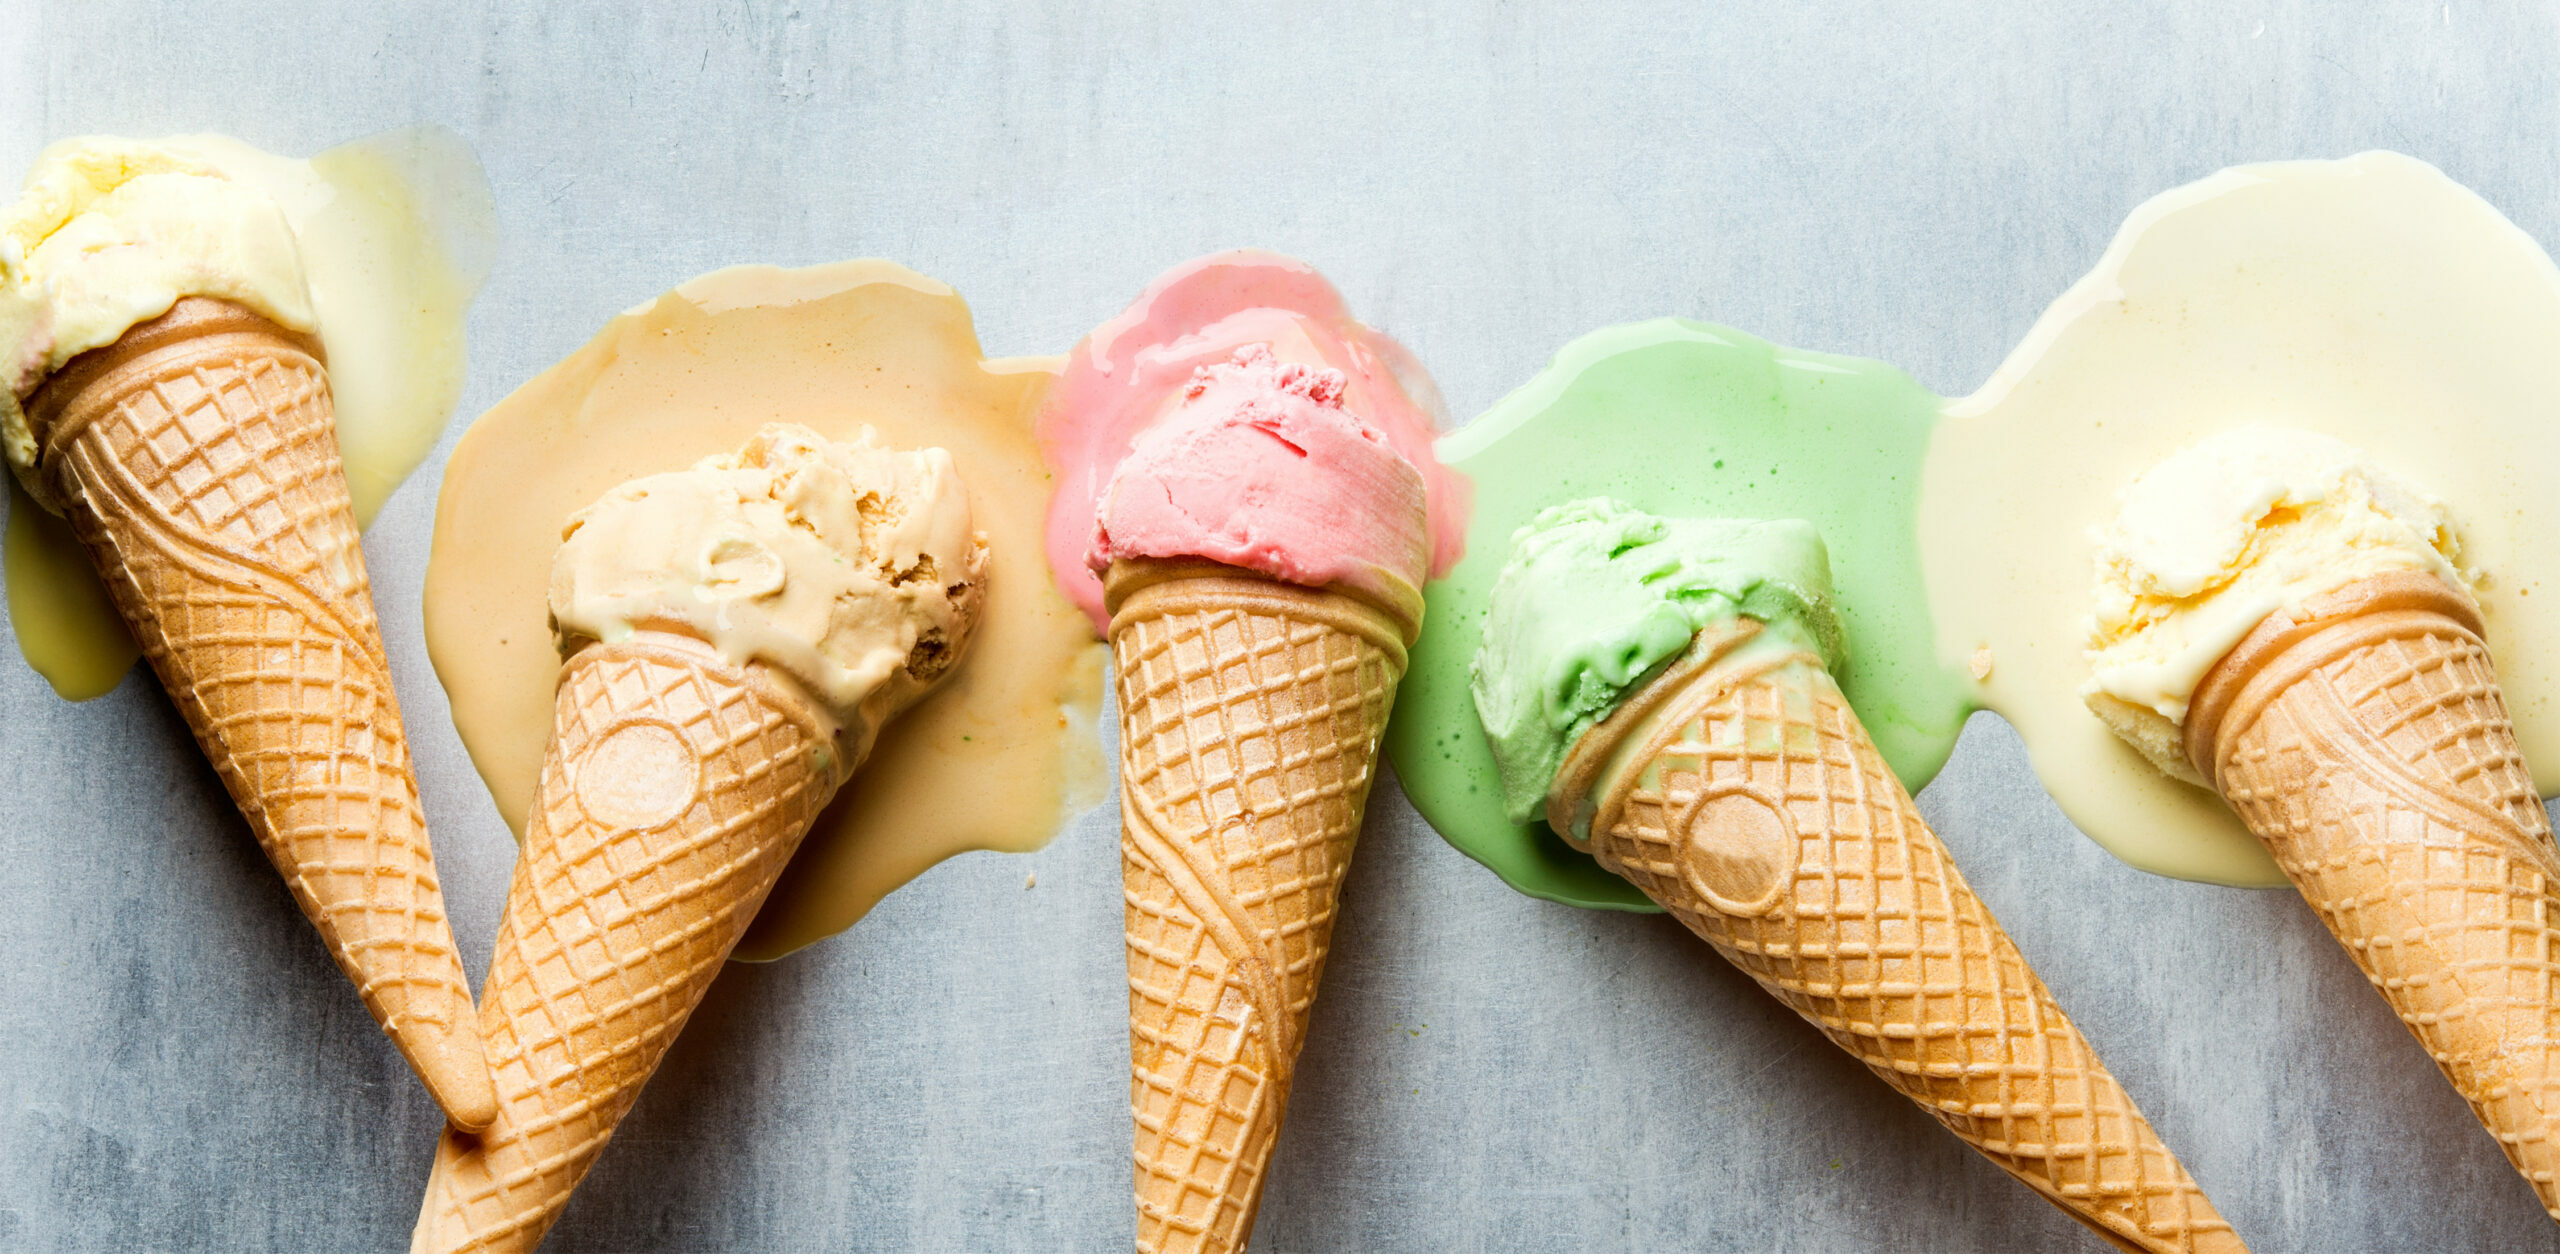 Colorful ice cream cones of different flavors. Melting scoops. 